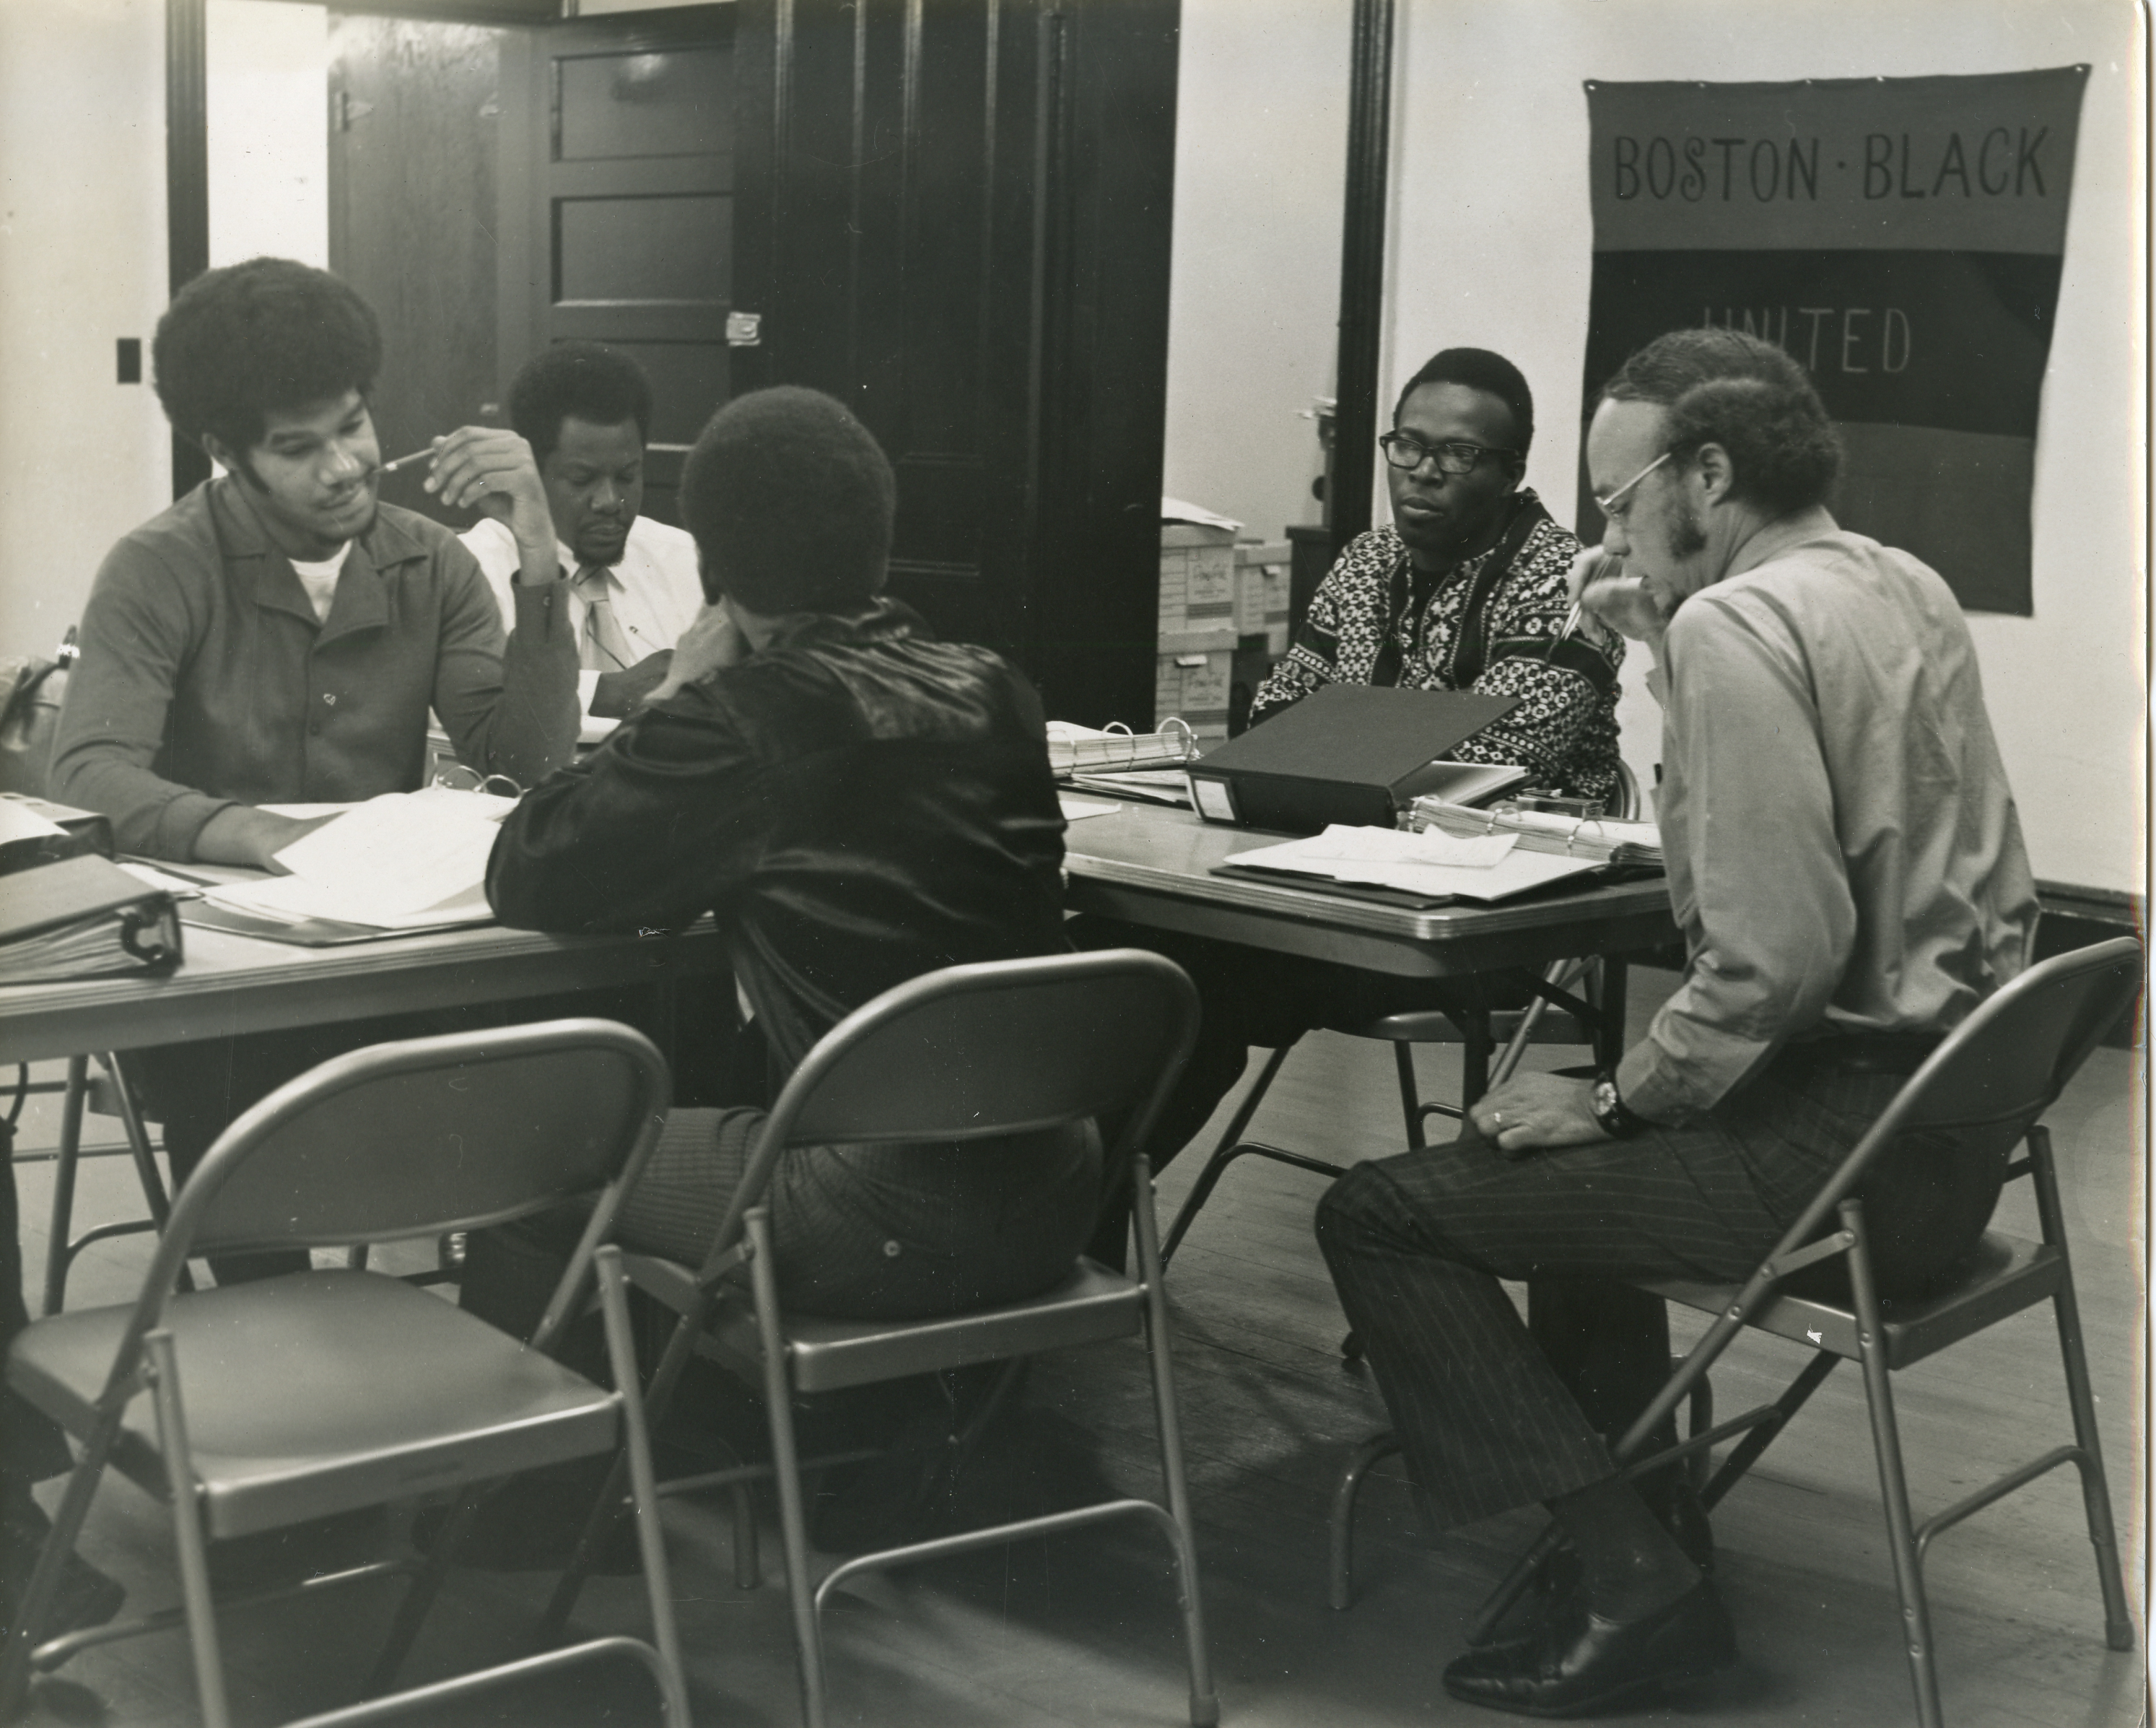 A black and white photograph shows several men sitting around a table working on papers on the table. A banner in the back reads "Boston Black United."